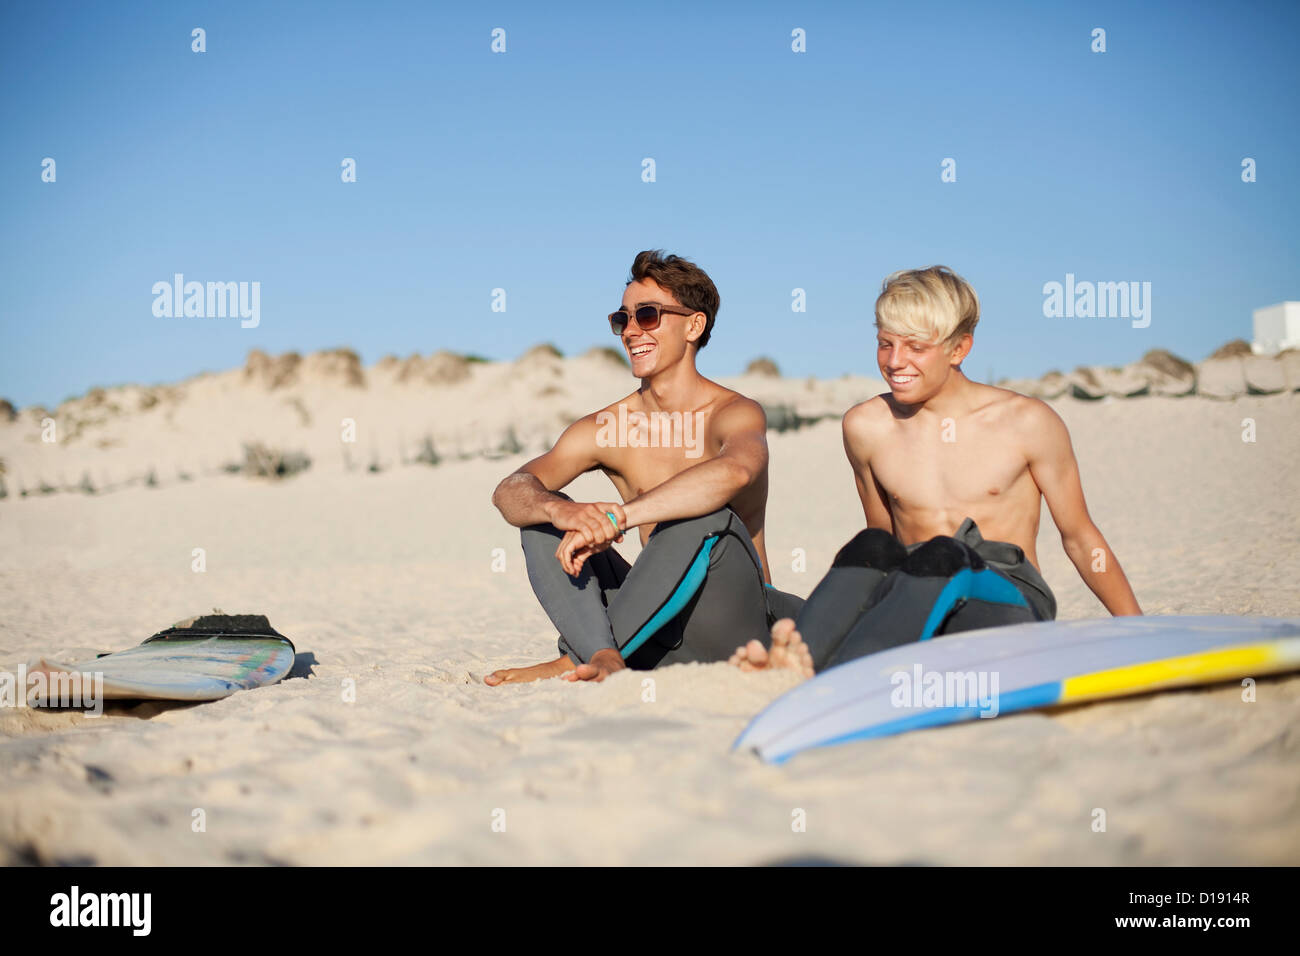 Two young surfers sitting on a beach Stock Photo